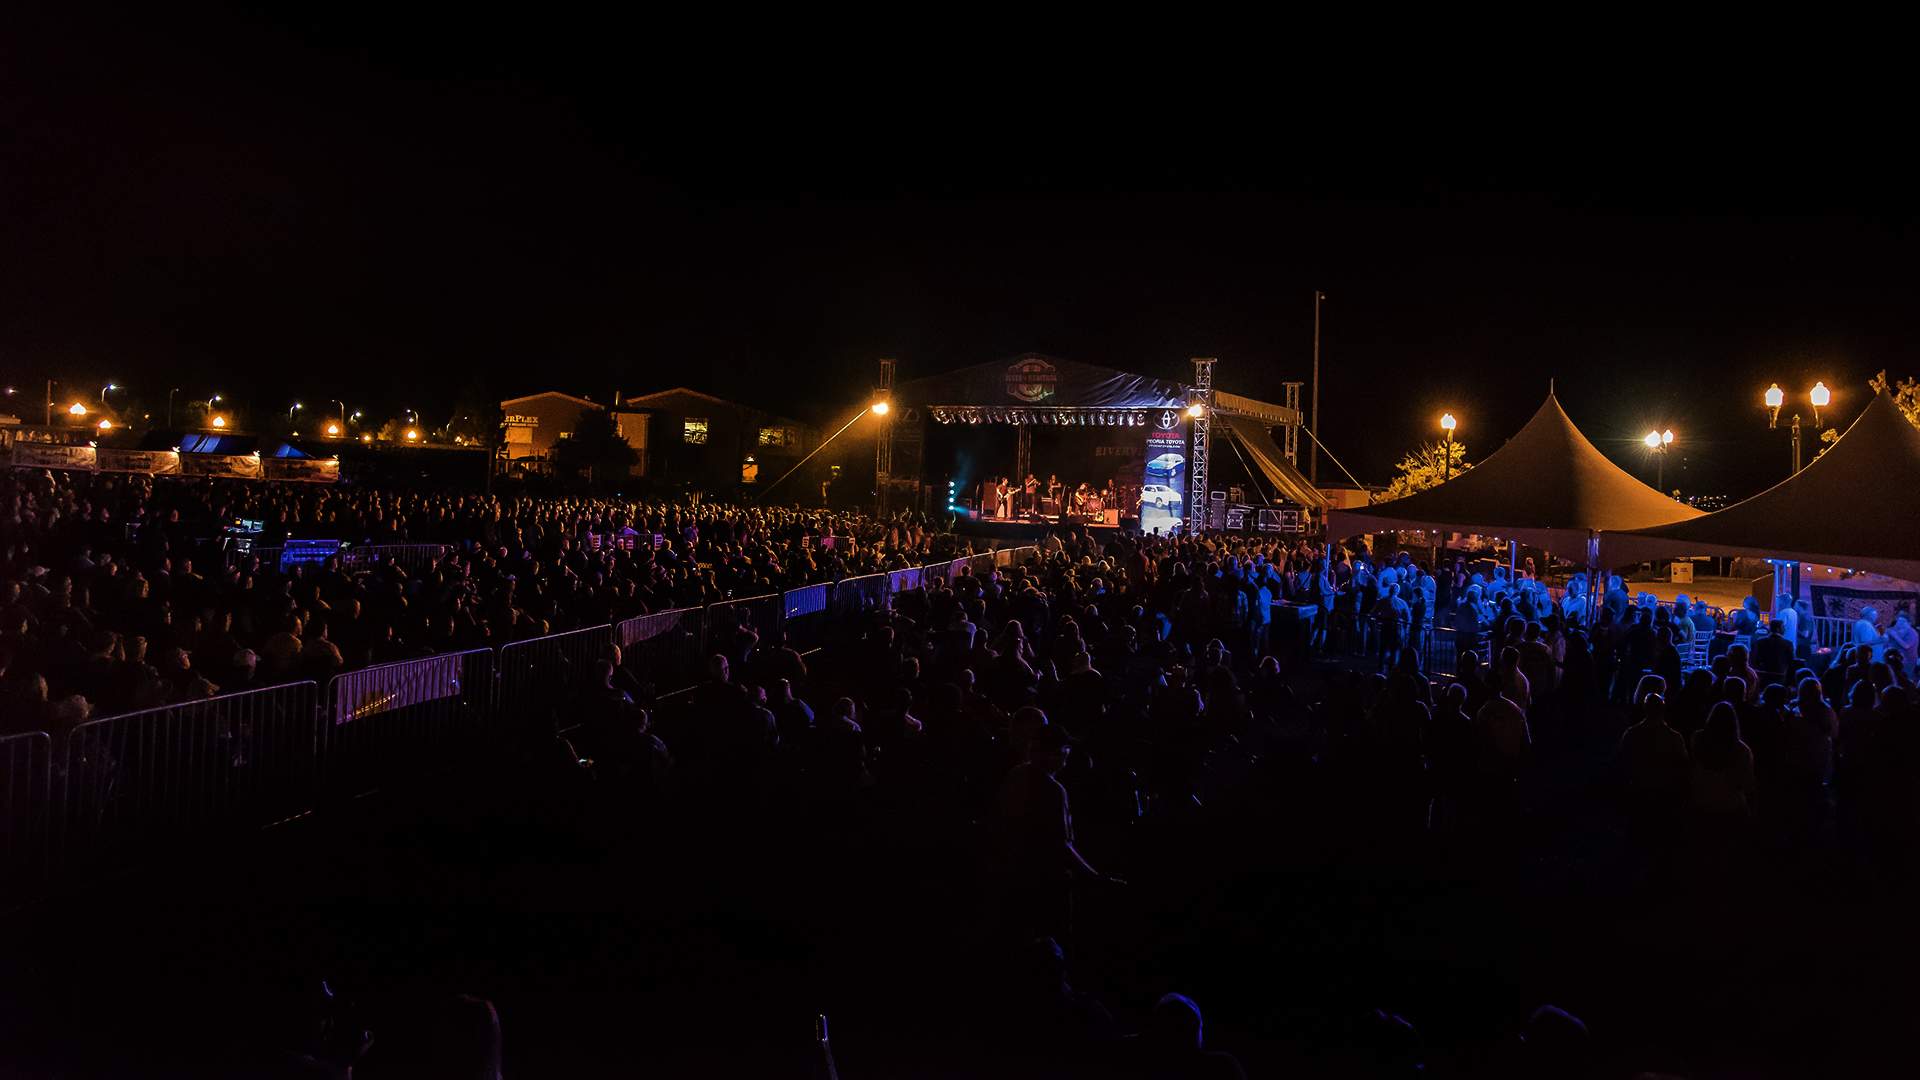 At night, a crowd enjoying a performance at the Peoria Blues and Heritage Festival